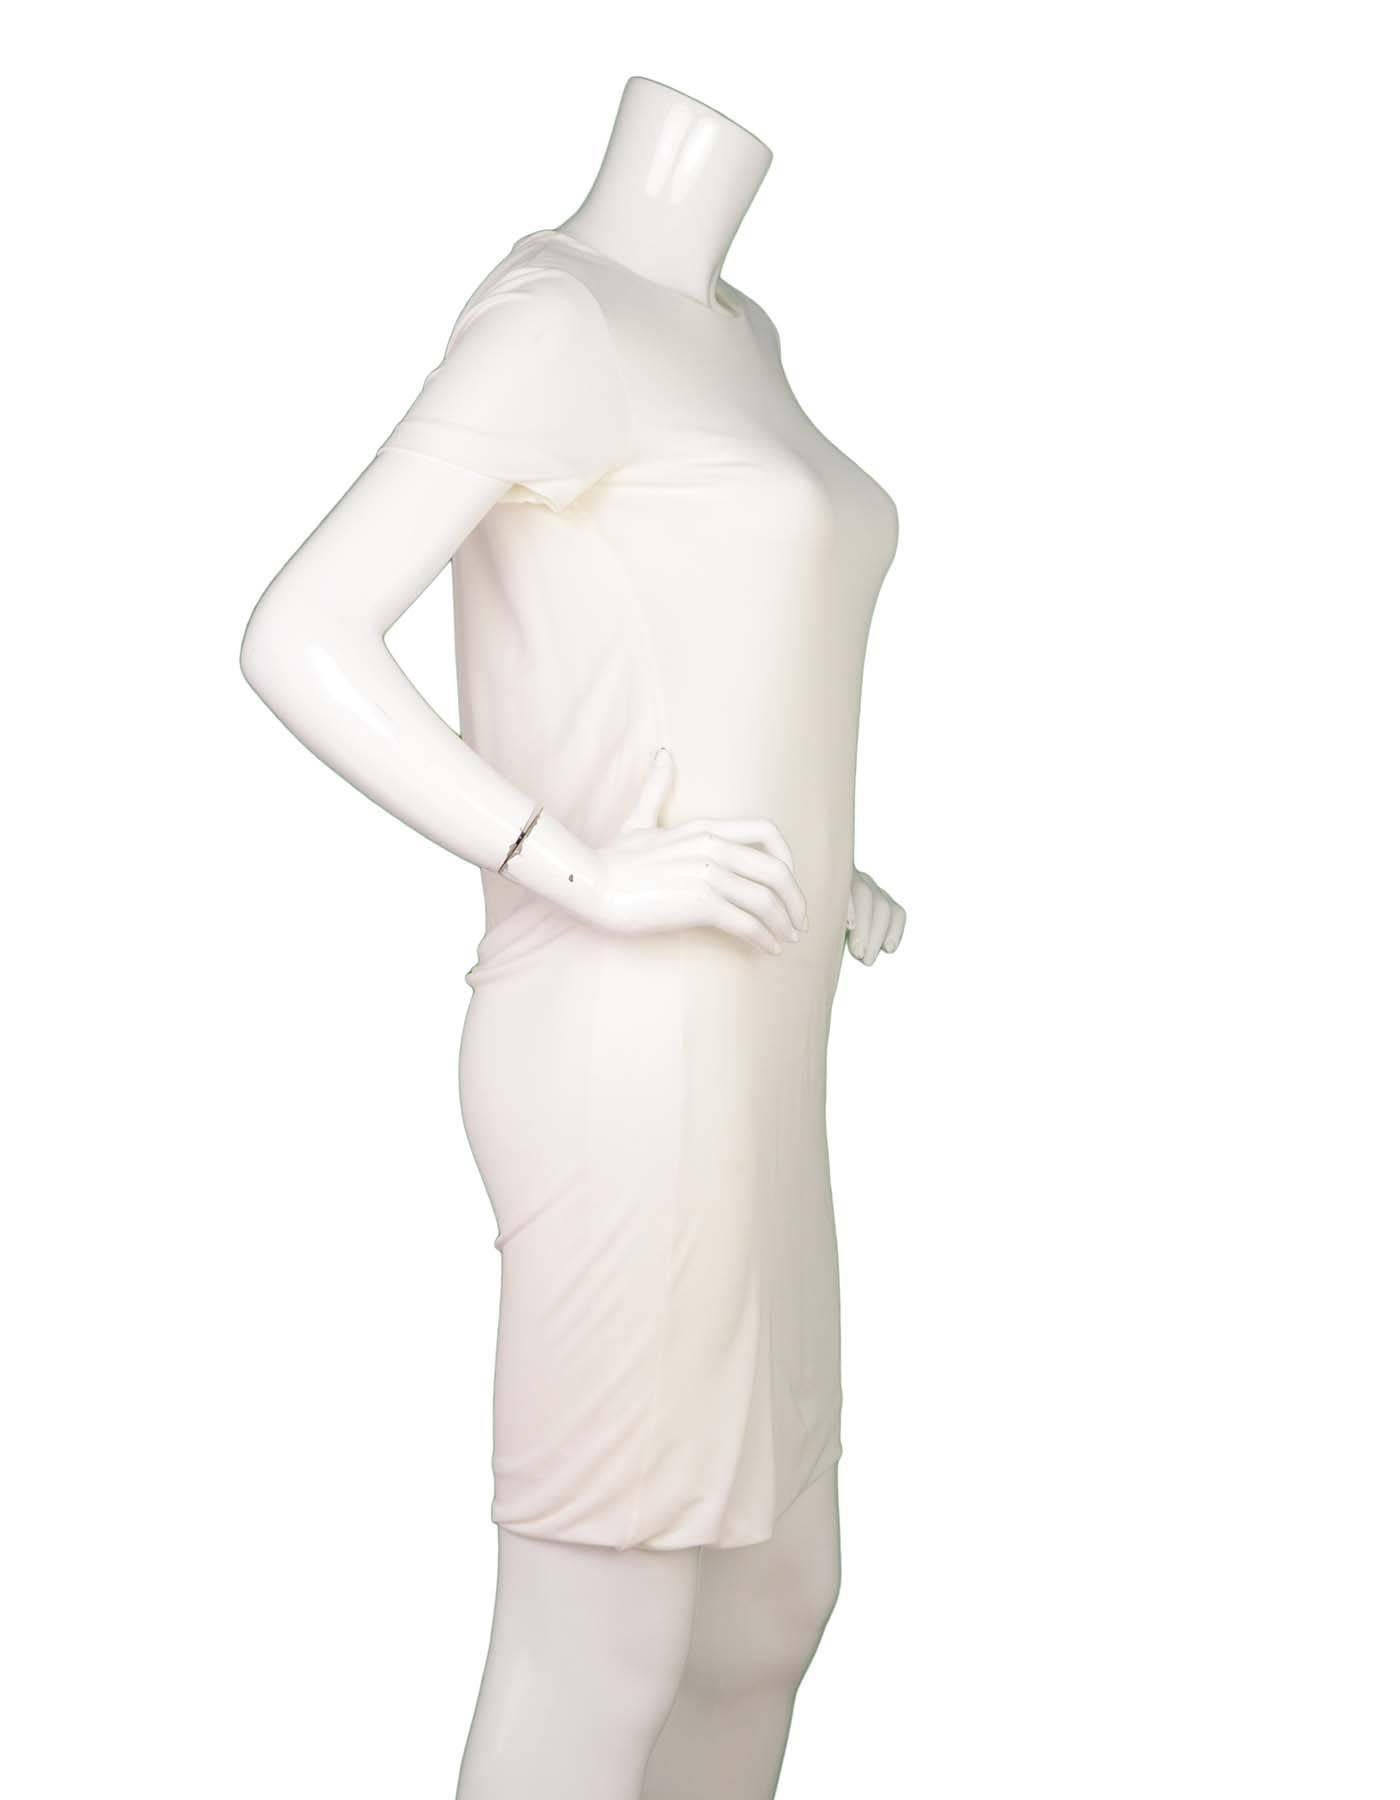 Gucci Off-White Short Sleeve Sheath Dress 
Features draping in back of dress
Made In: Italy
Color: Off-white
Composition: 100% viscose
Lining: Off-white, 65% acetate, 35% polyamide
Closure/Opening: Pull over with goldtone button at back